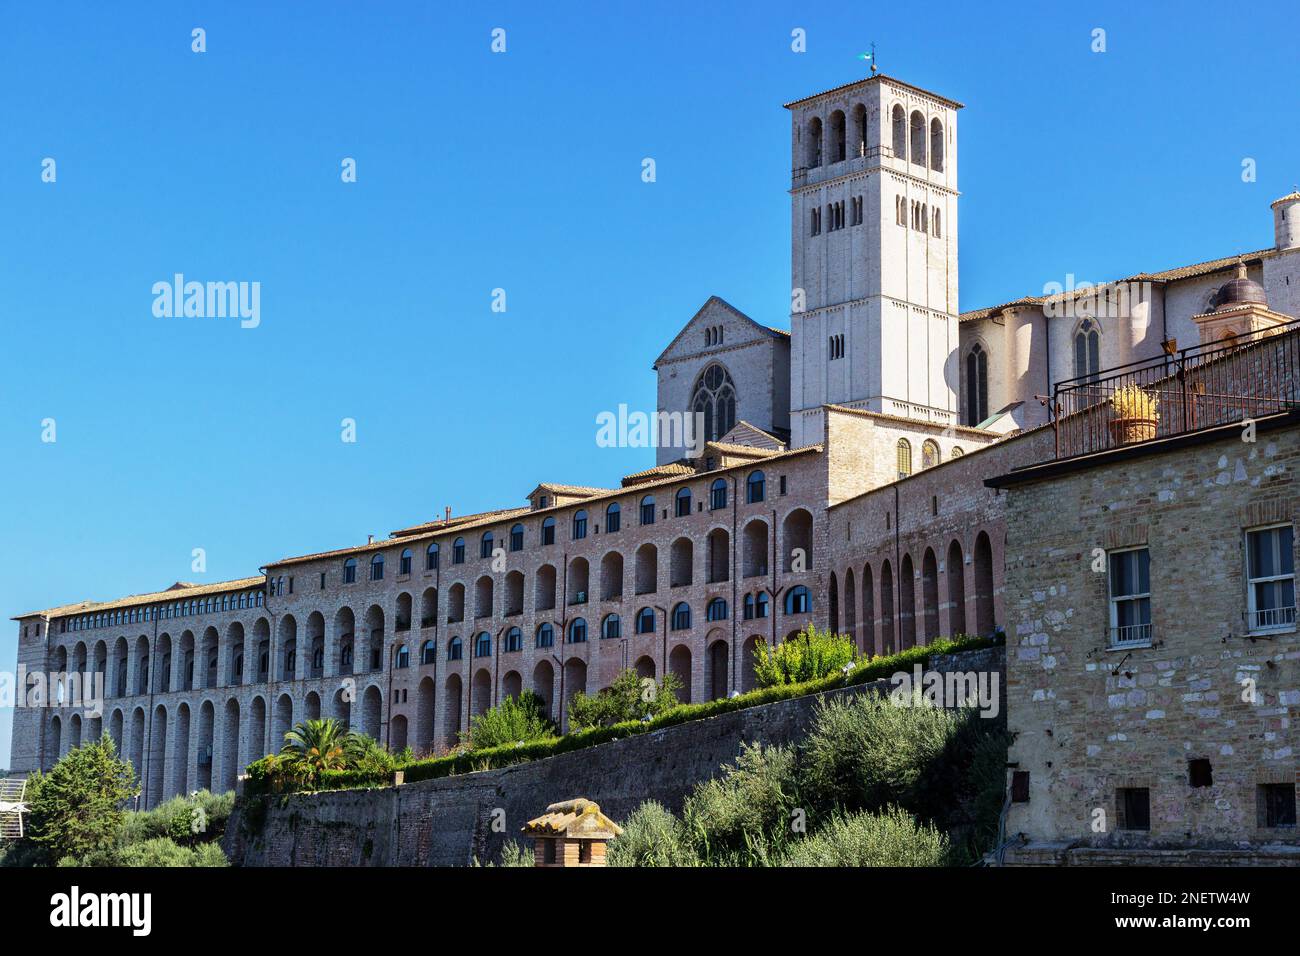 View from the outside of the imposing Basilica of San Francesco in Assisi Stock Photo